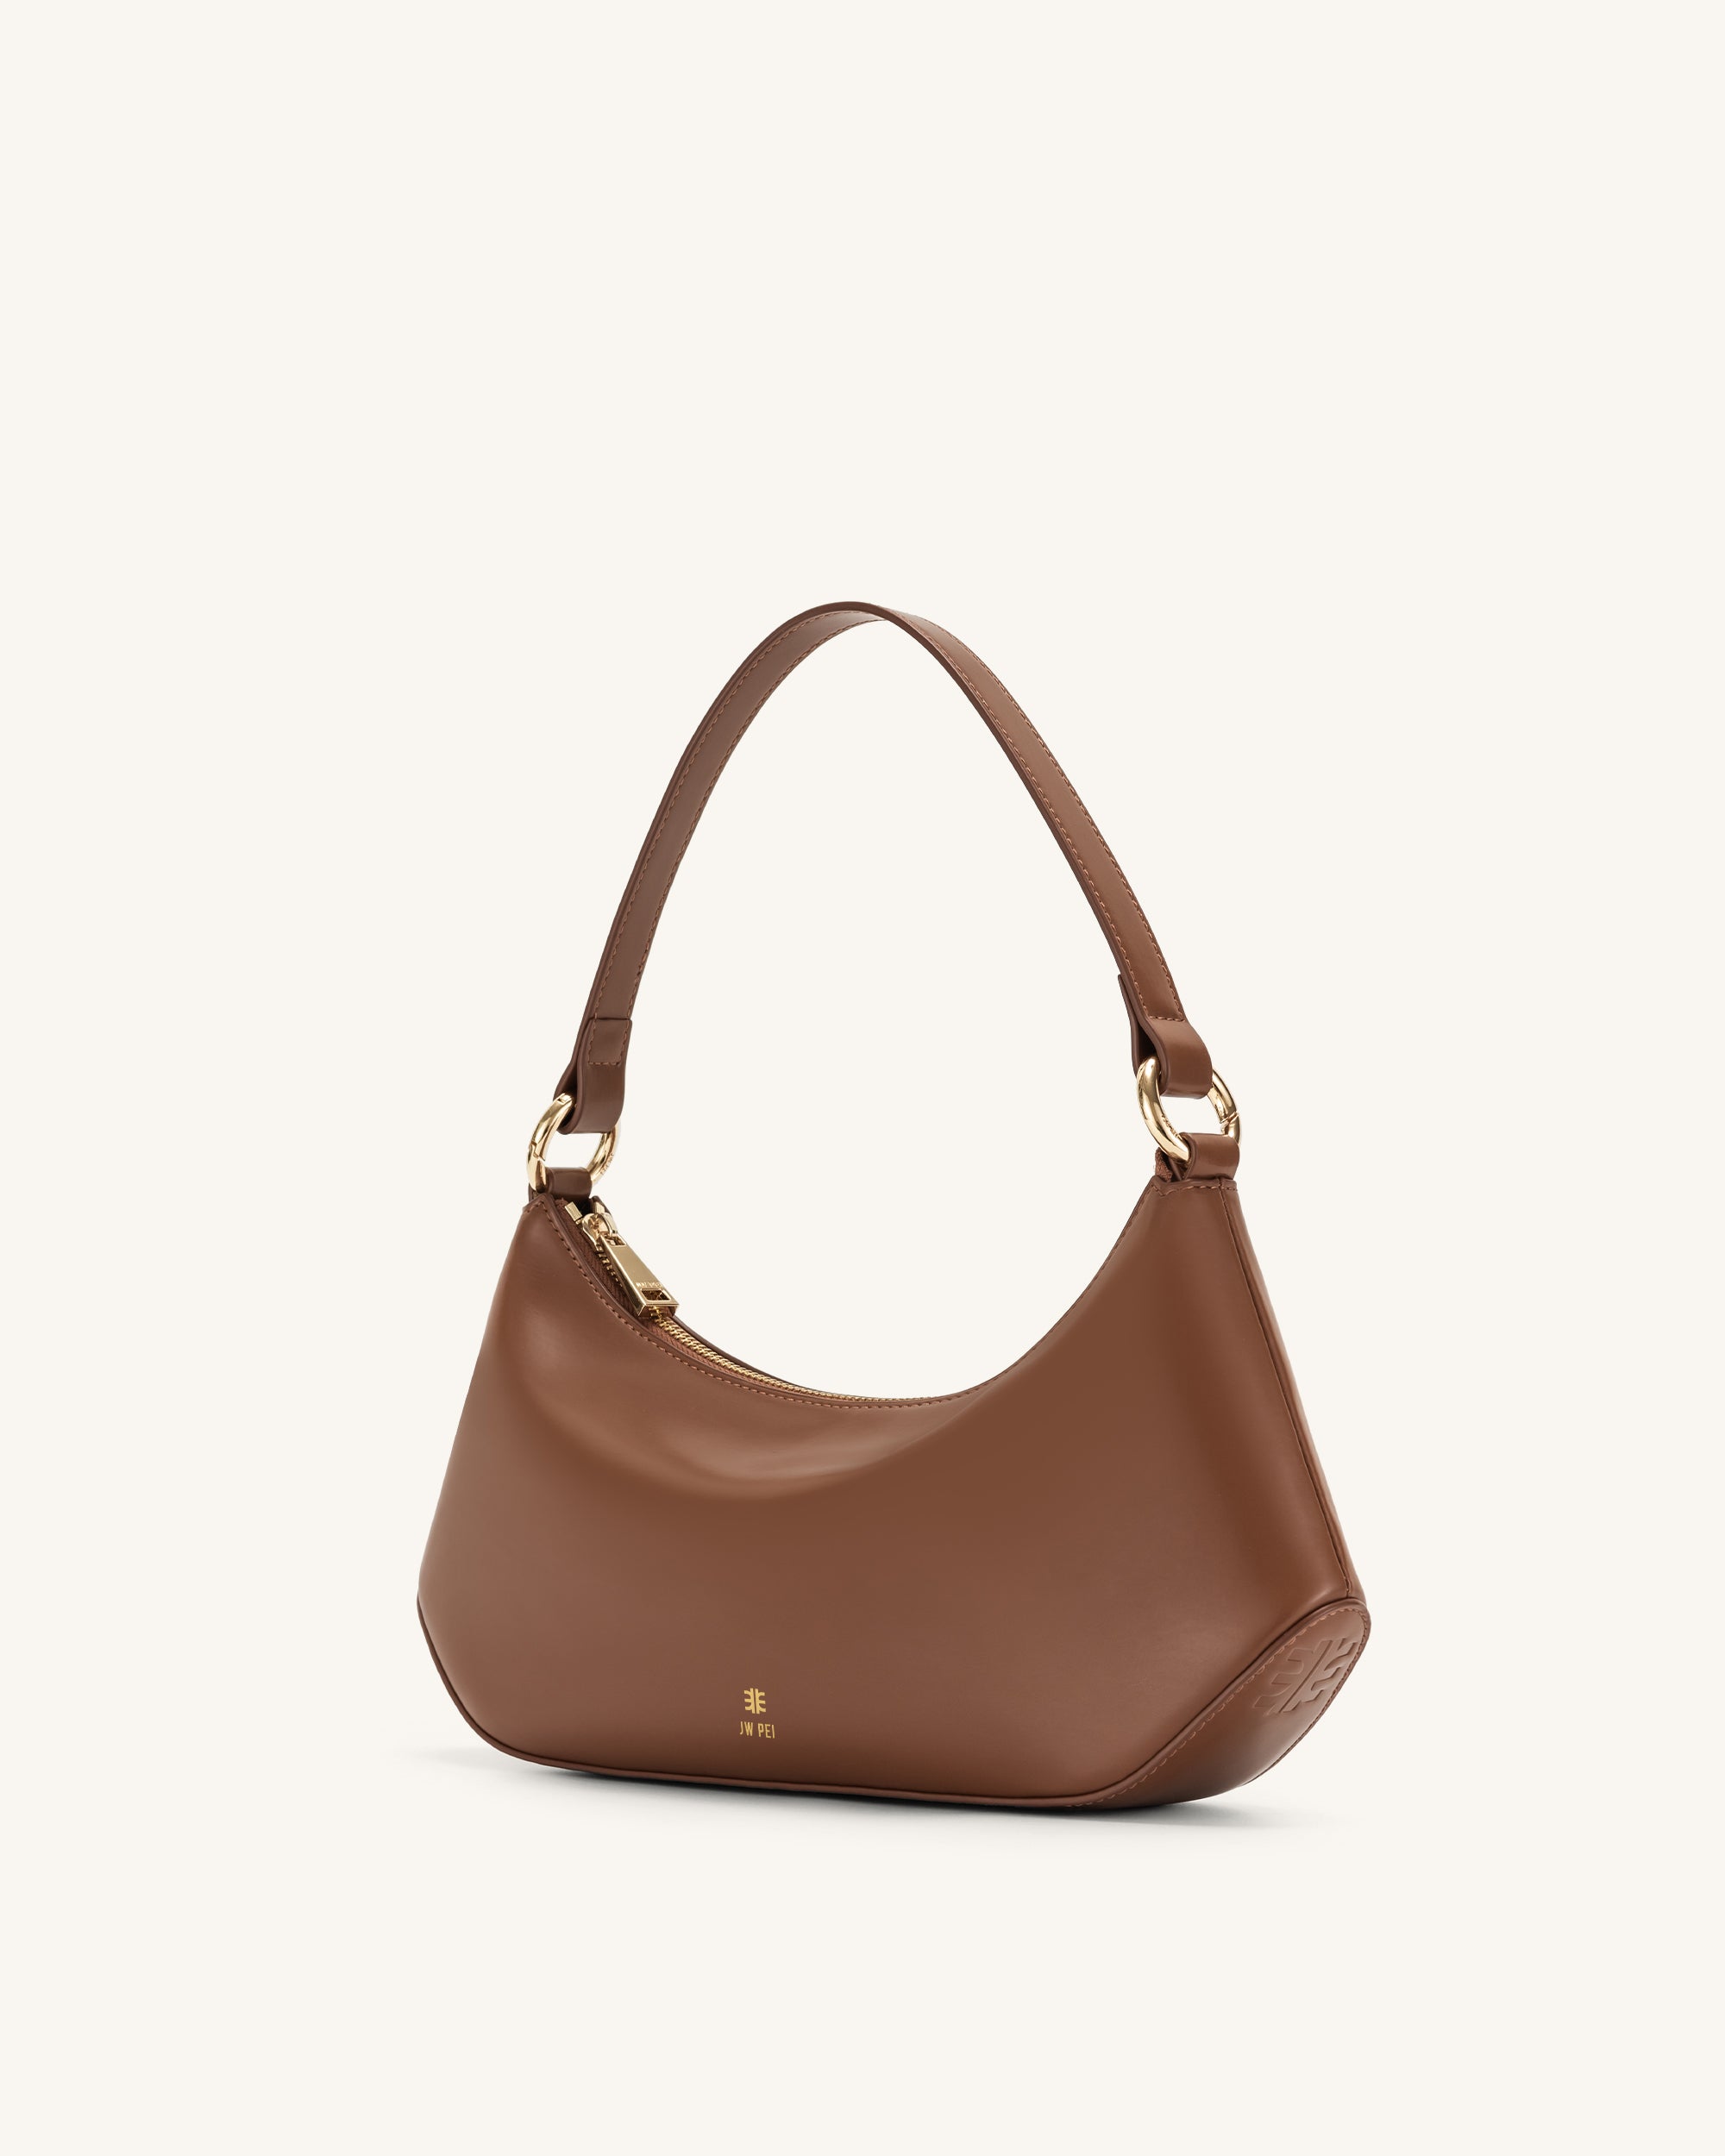 MIRELLE Leather Under The Arm Shoulder Handbag and Classic Purse -